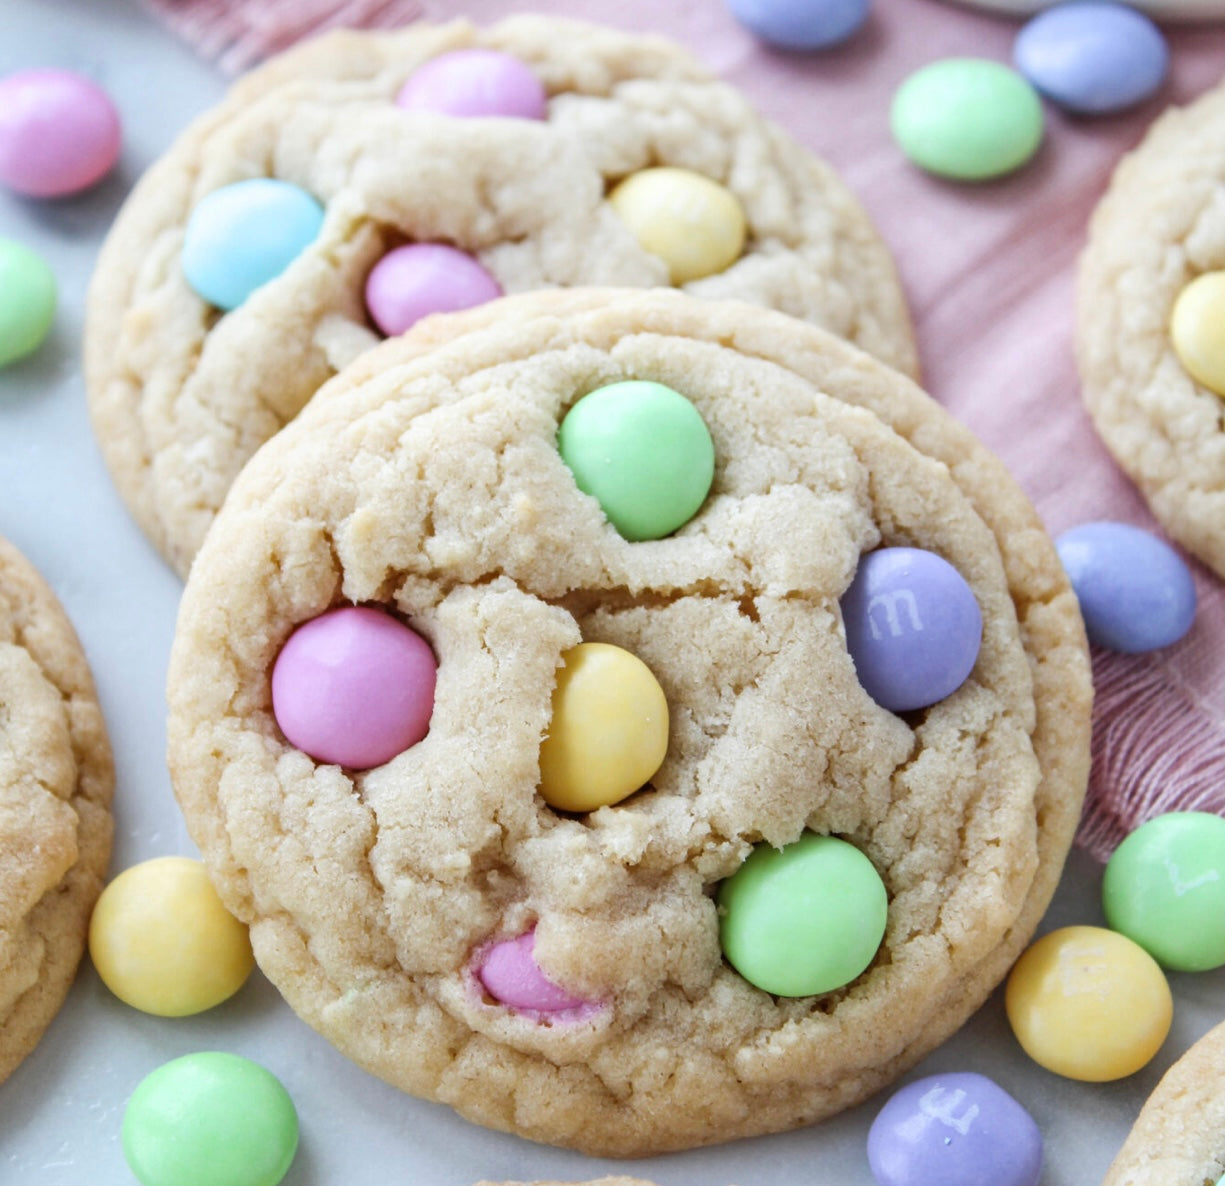 Chocolate Chip M&M Cookie Baking Class - Friday, March 15th. 6:30pm-8:30pm.